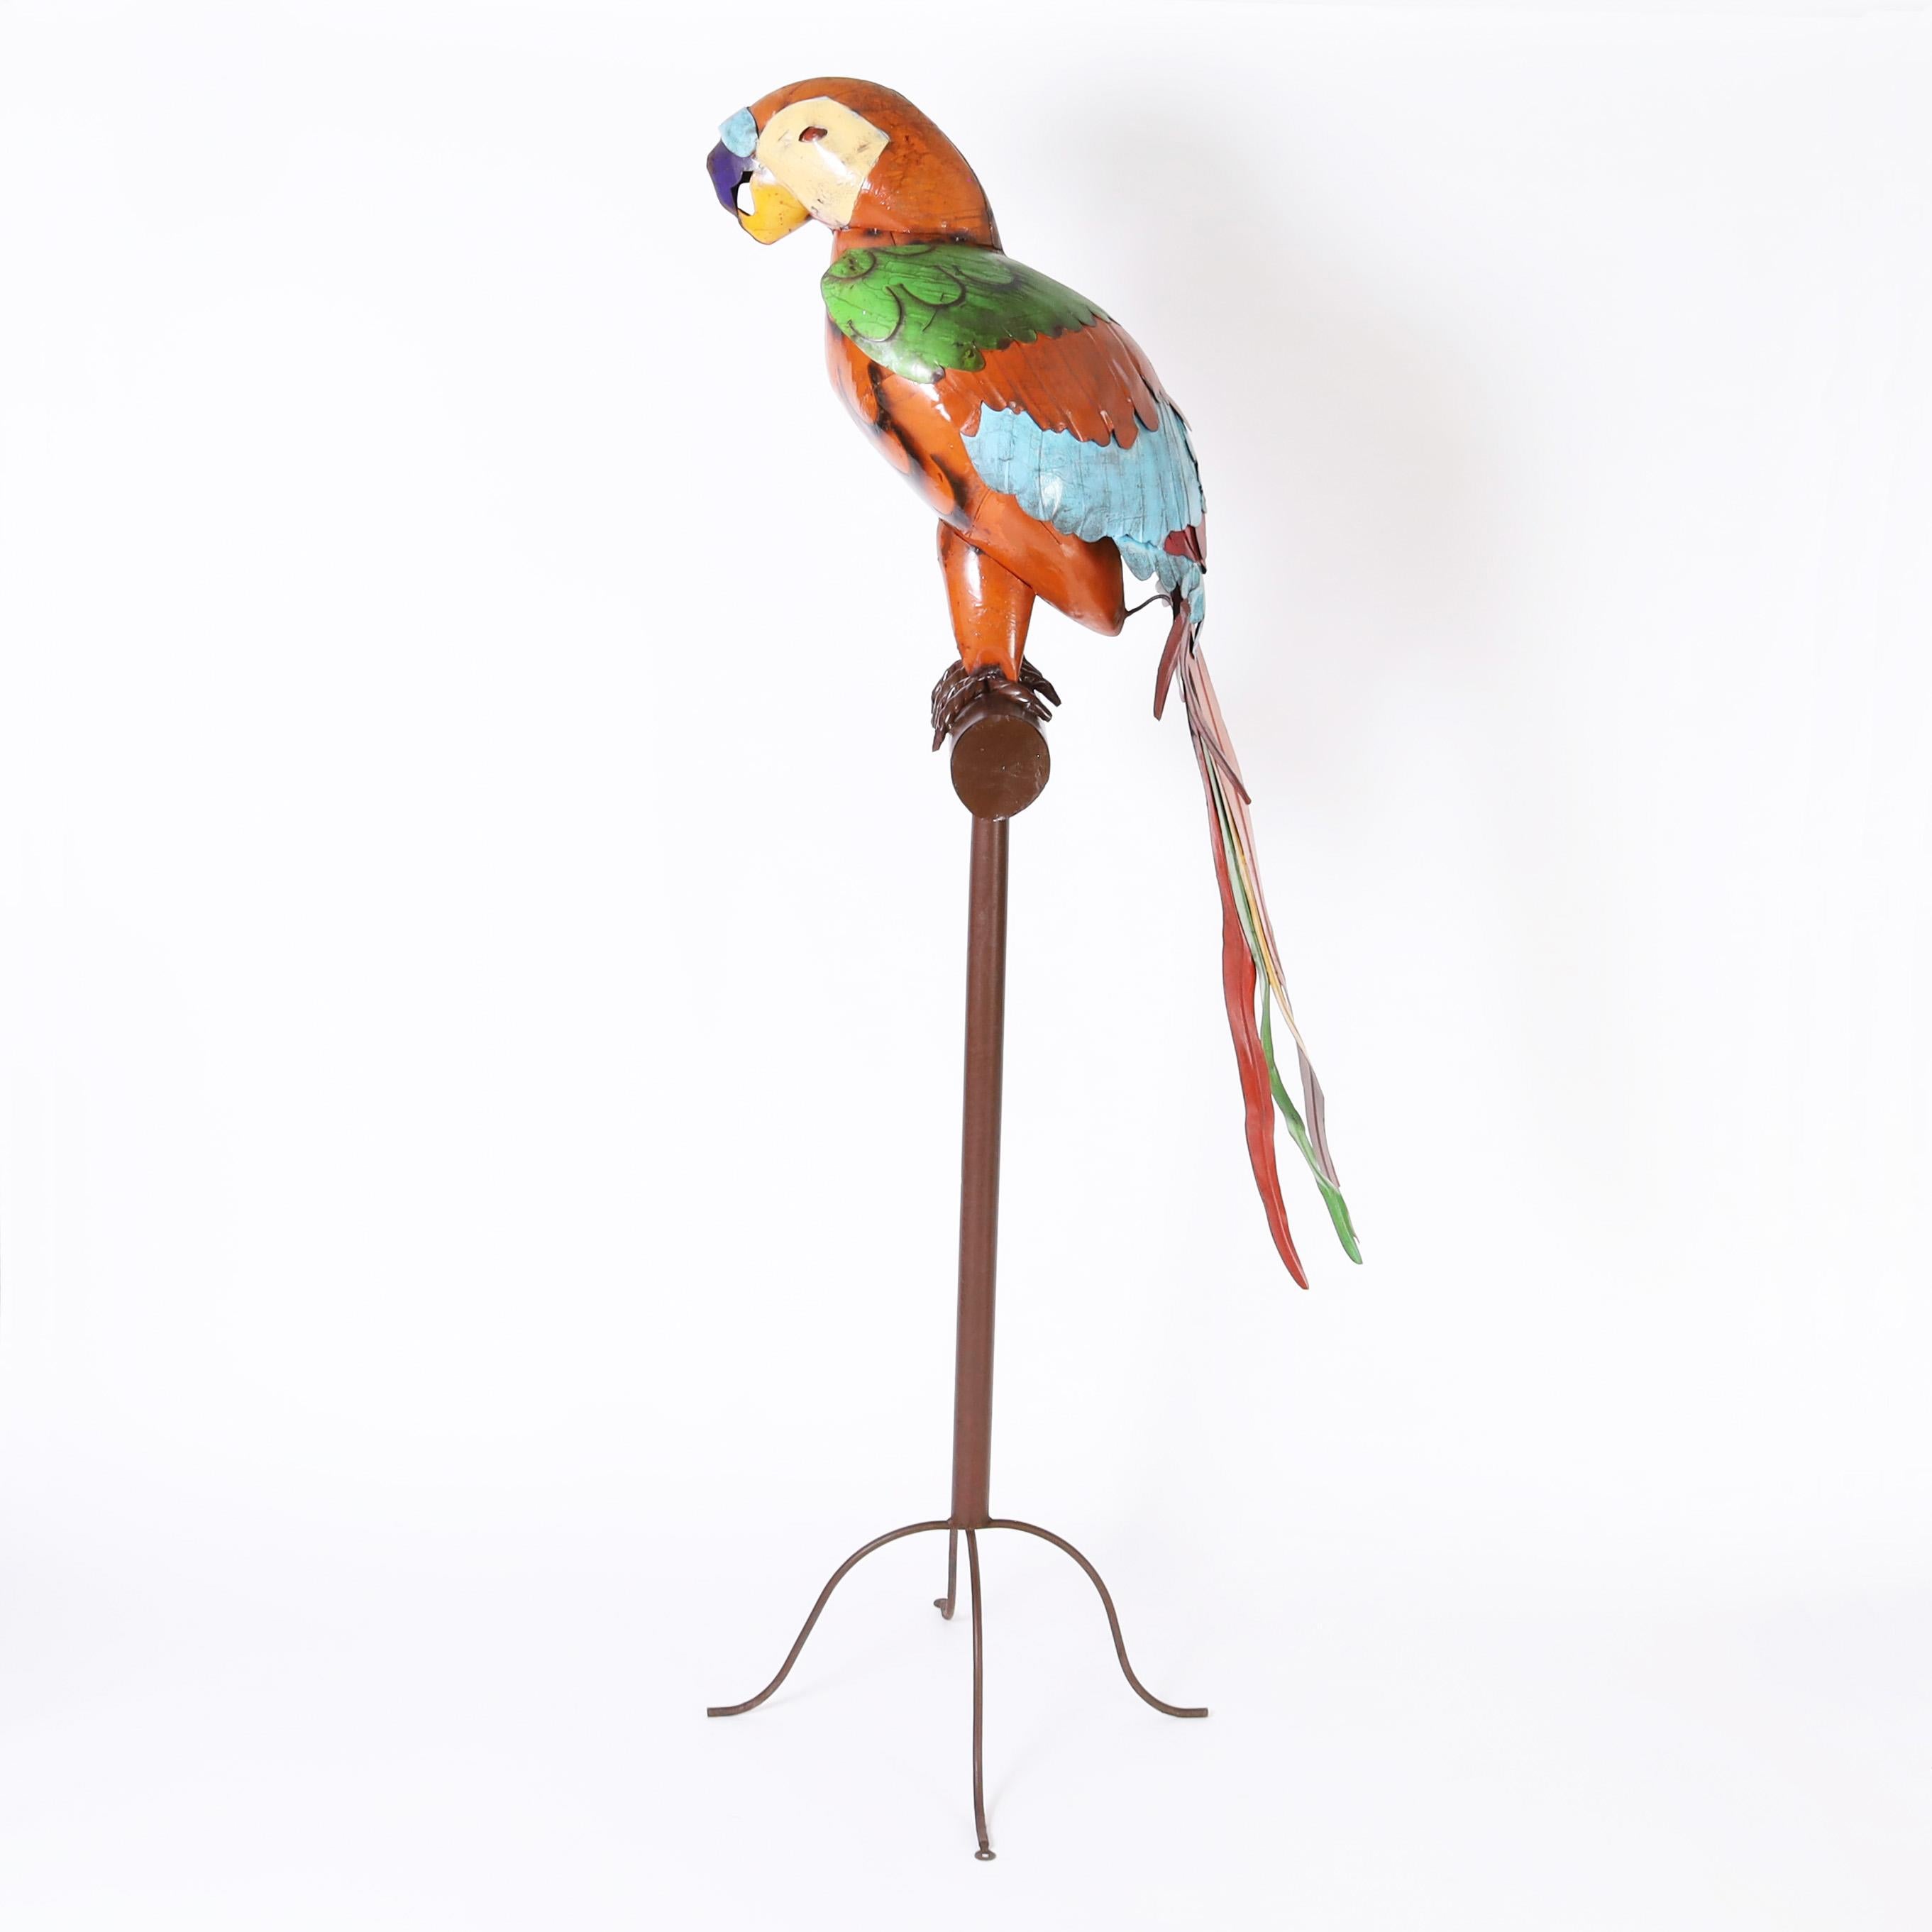 Outrageous vintage giant parrot sculpture hand crafted in metal, paint decorated and permanently perched on a metal stand with four cabriole legs.